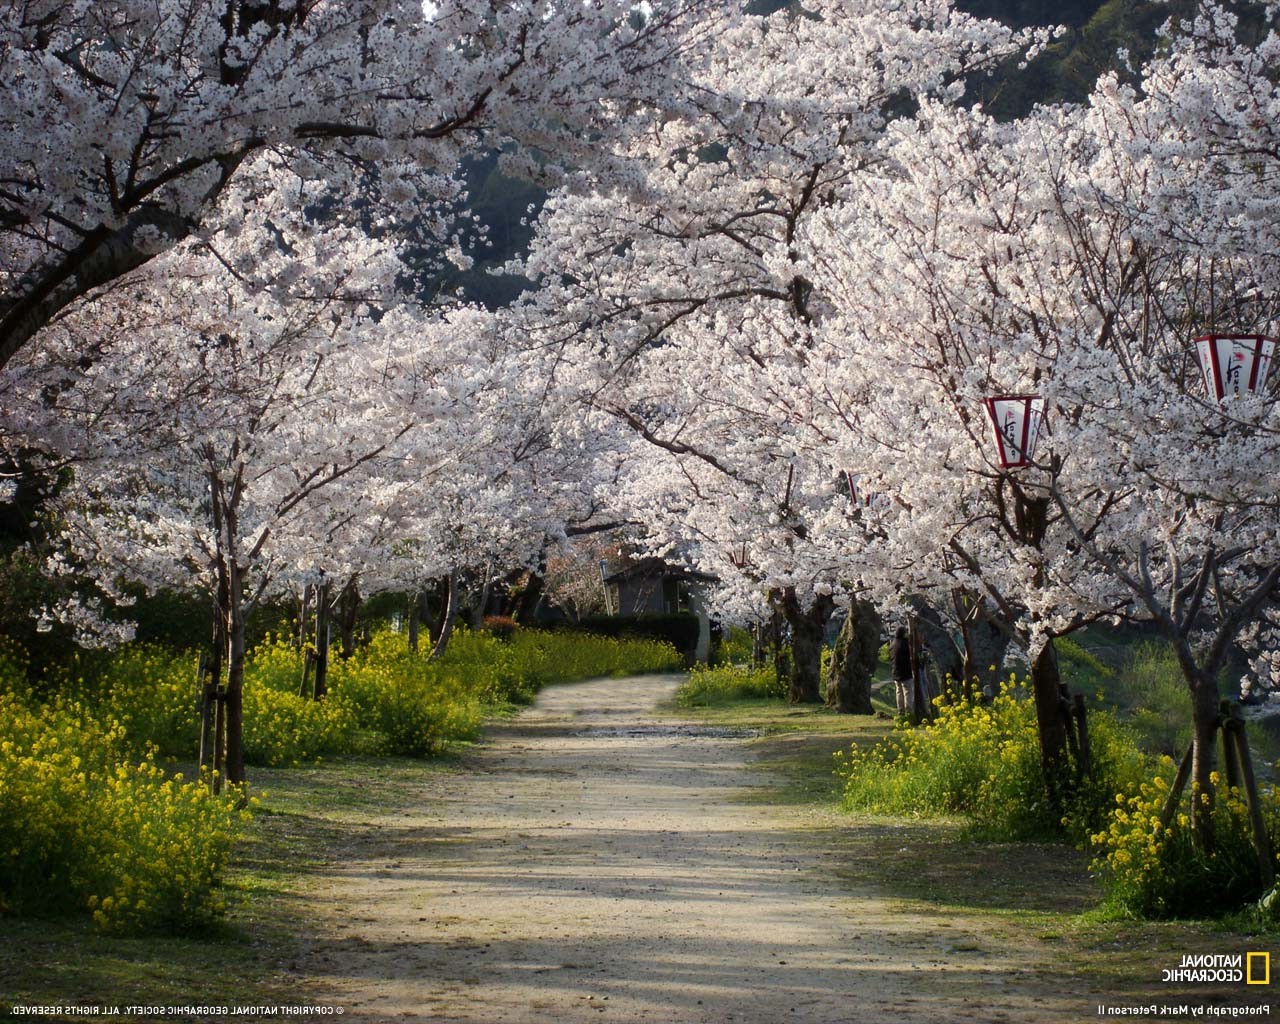 National Geographic Trees Nature Cherry Blossom Japan Path Dirt